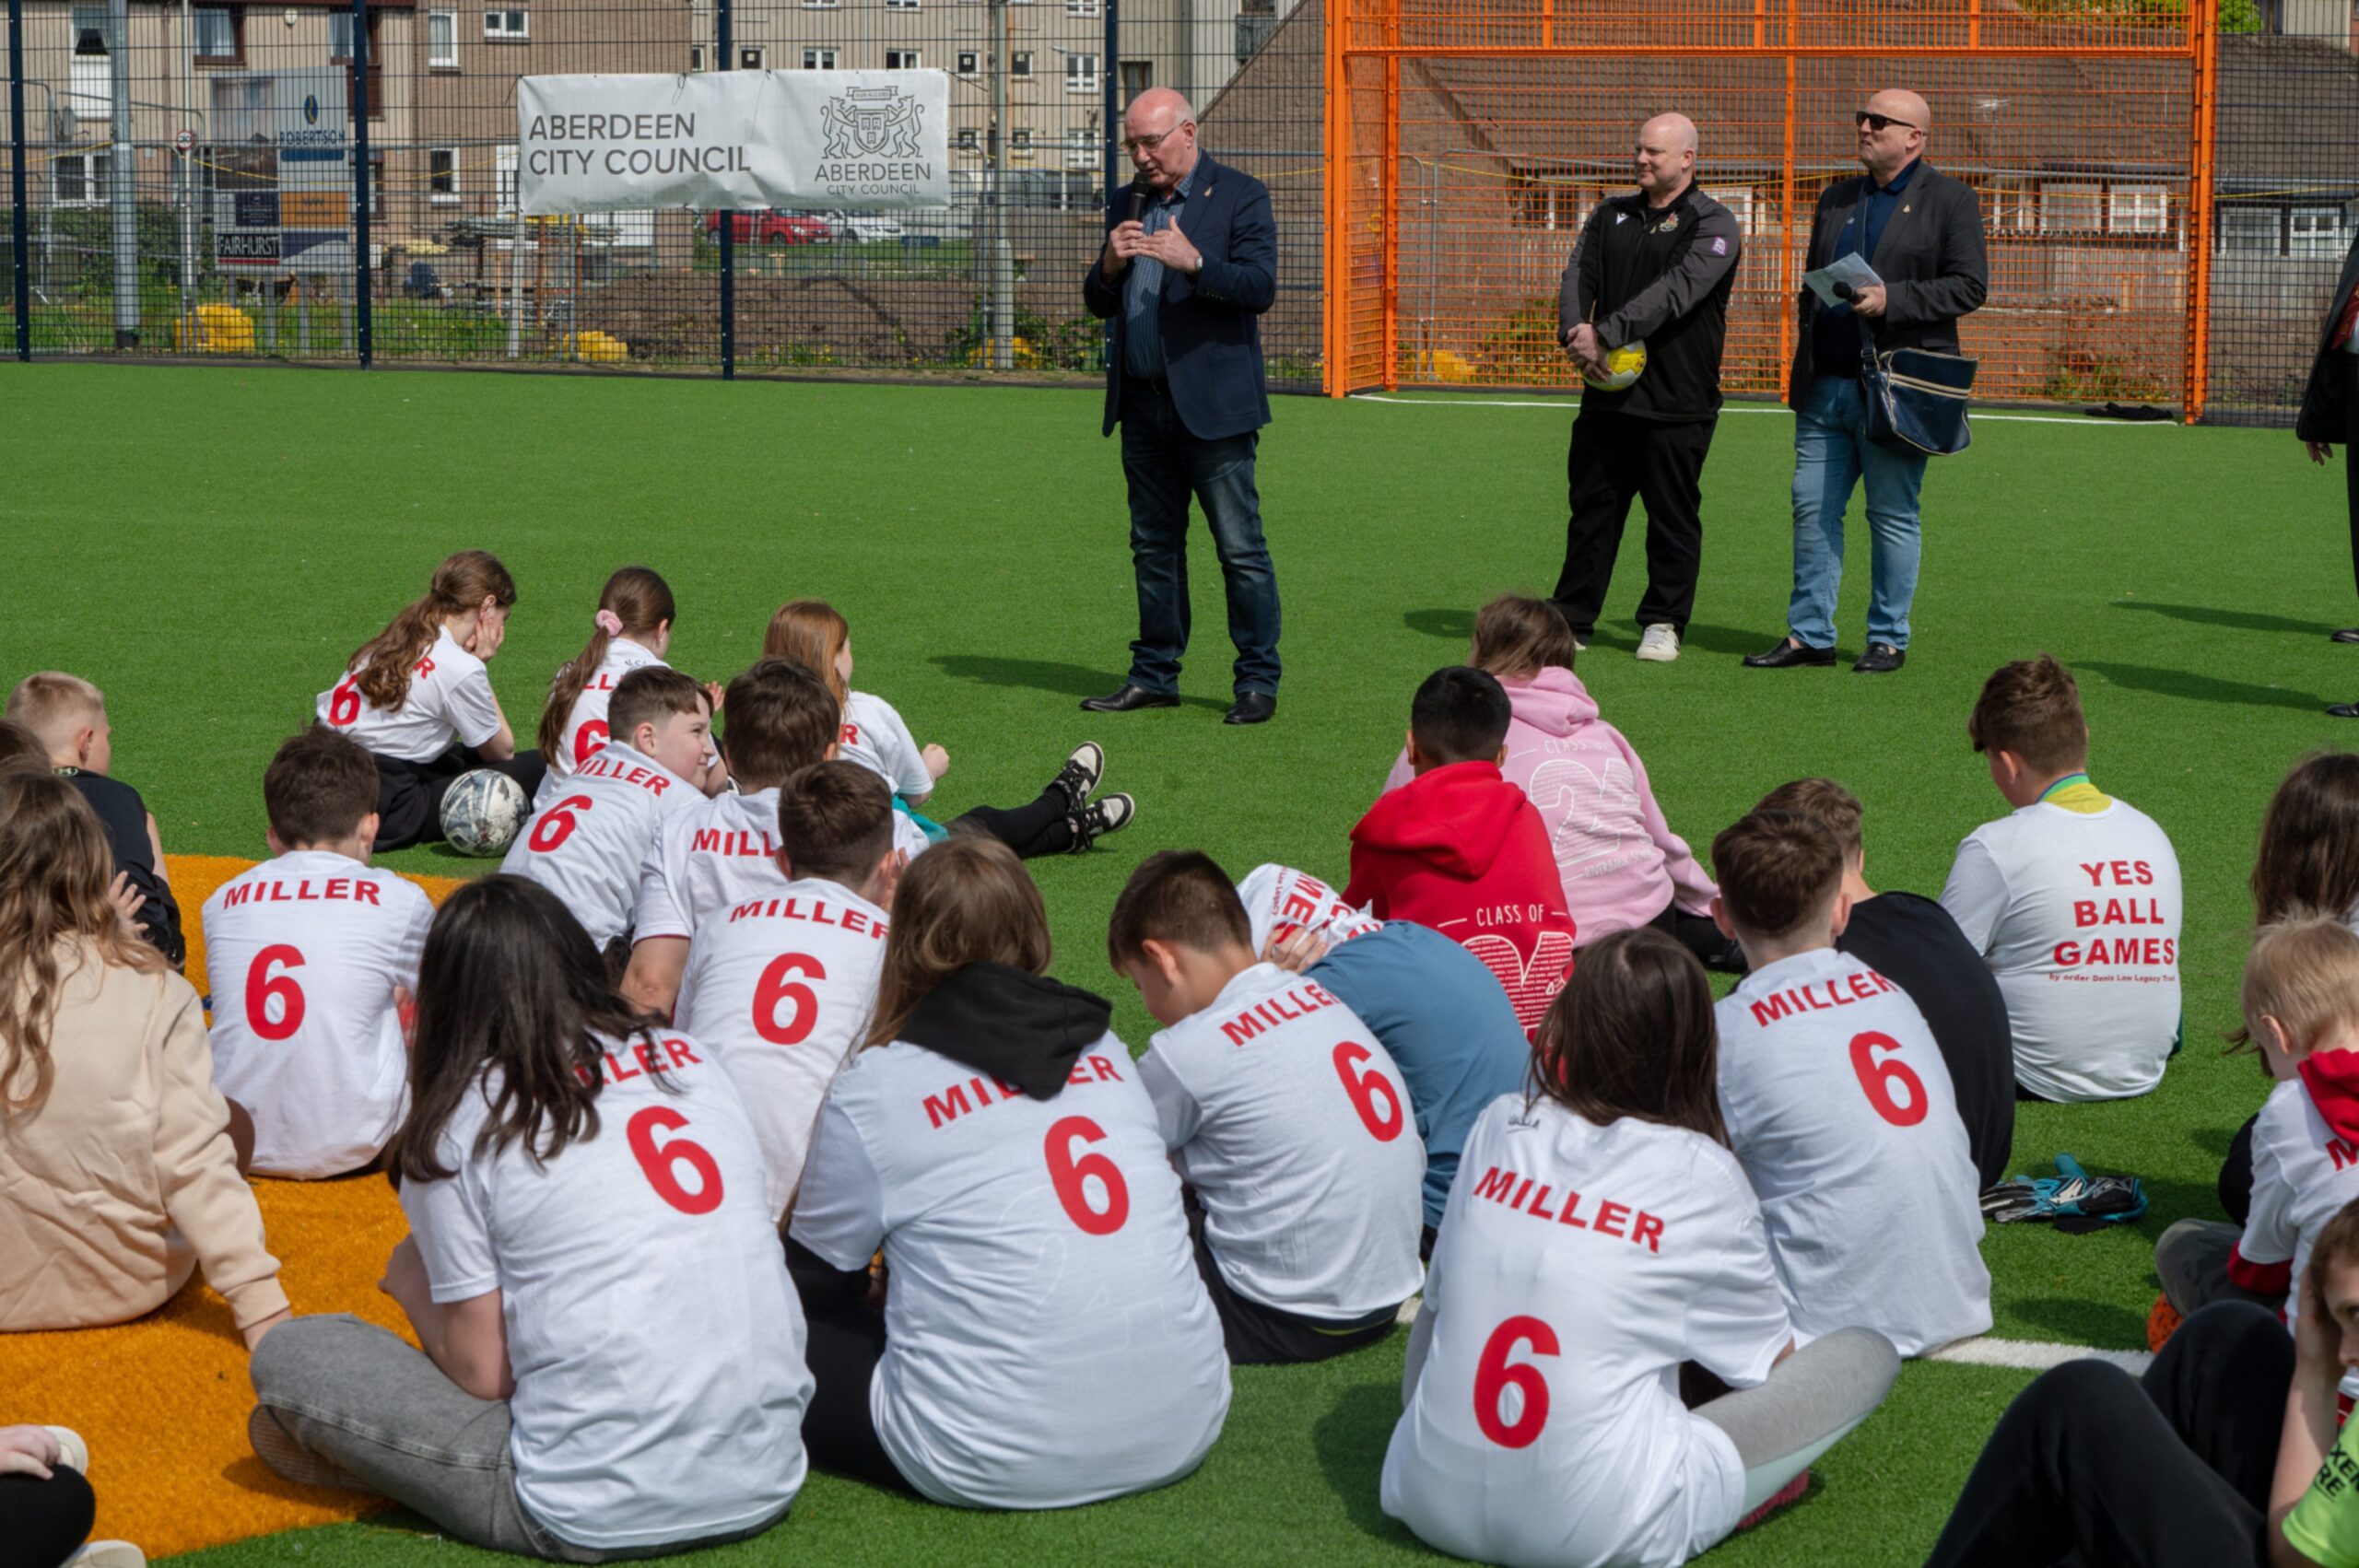 Denis Law Legacy Trust, Aberdeen City Council and the Johan Cruyff Foundation officially opening of Cruyff Court Willie Miller, named after Aberdeen FC's legendary captain Willie Miller in Tillydrone.